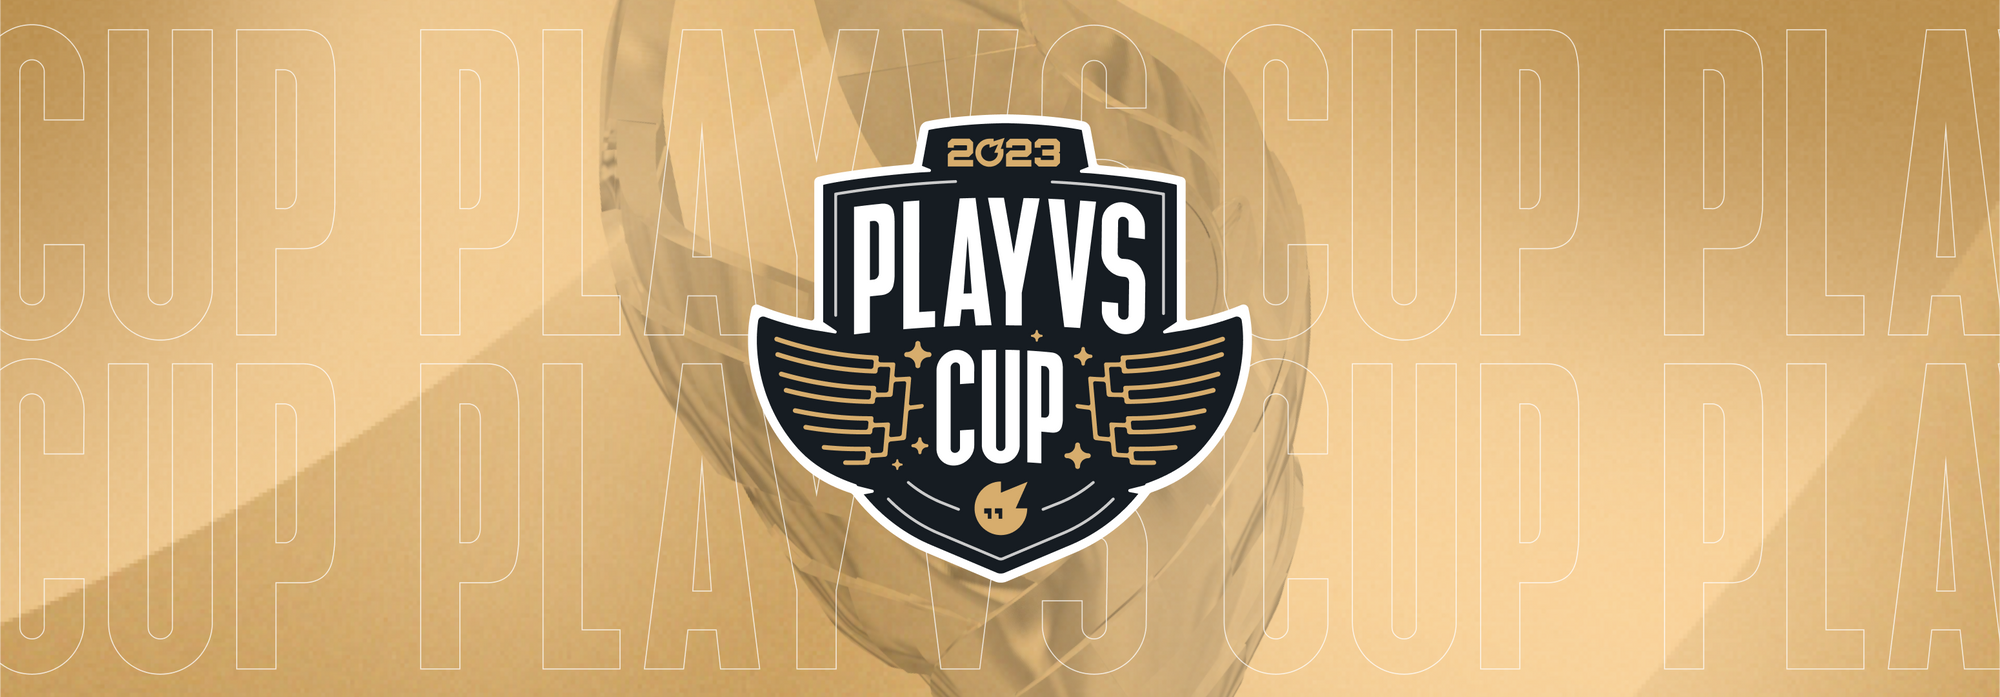 Road to the PlayVS Cup Spotlights